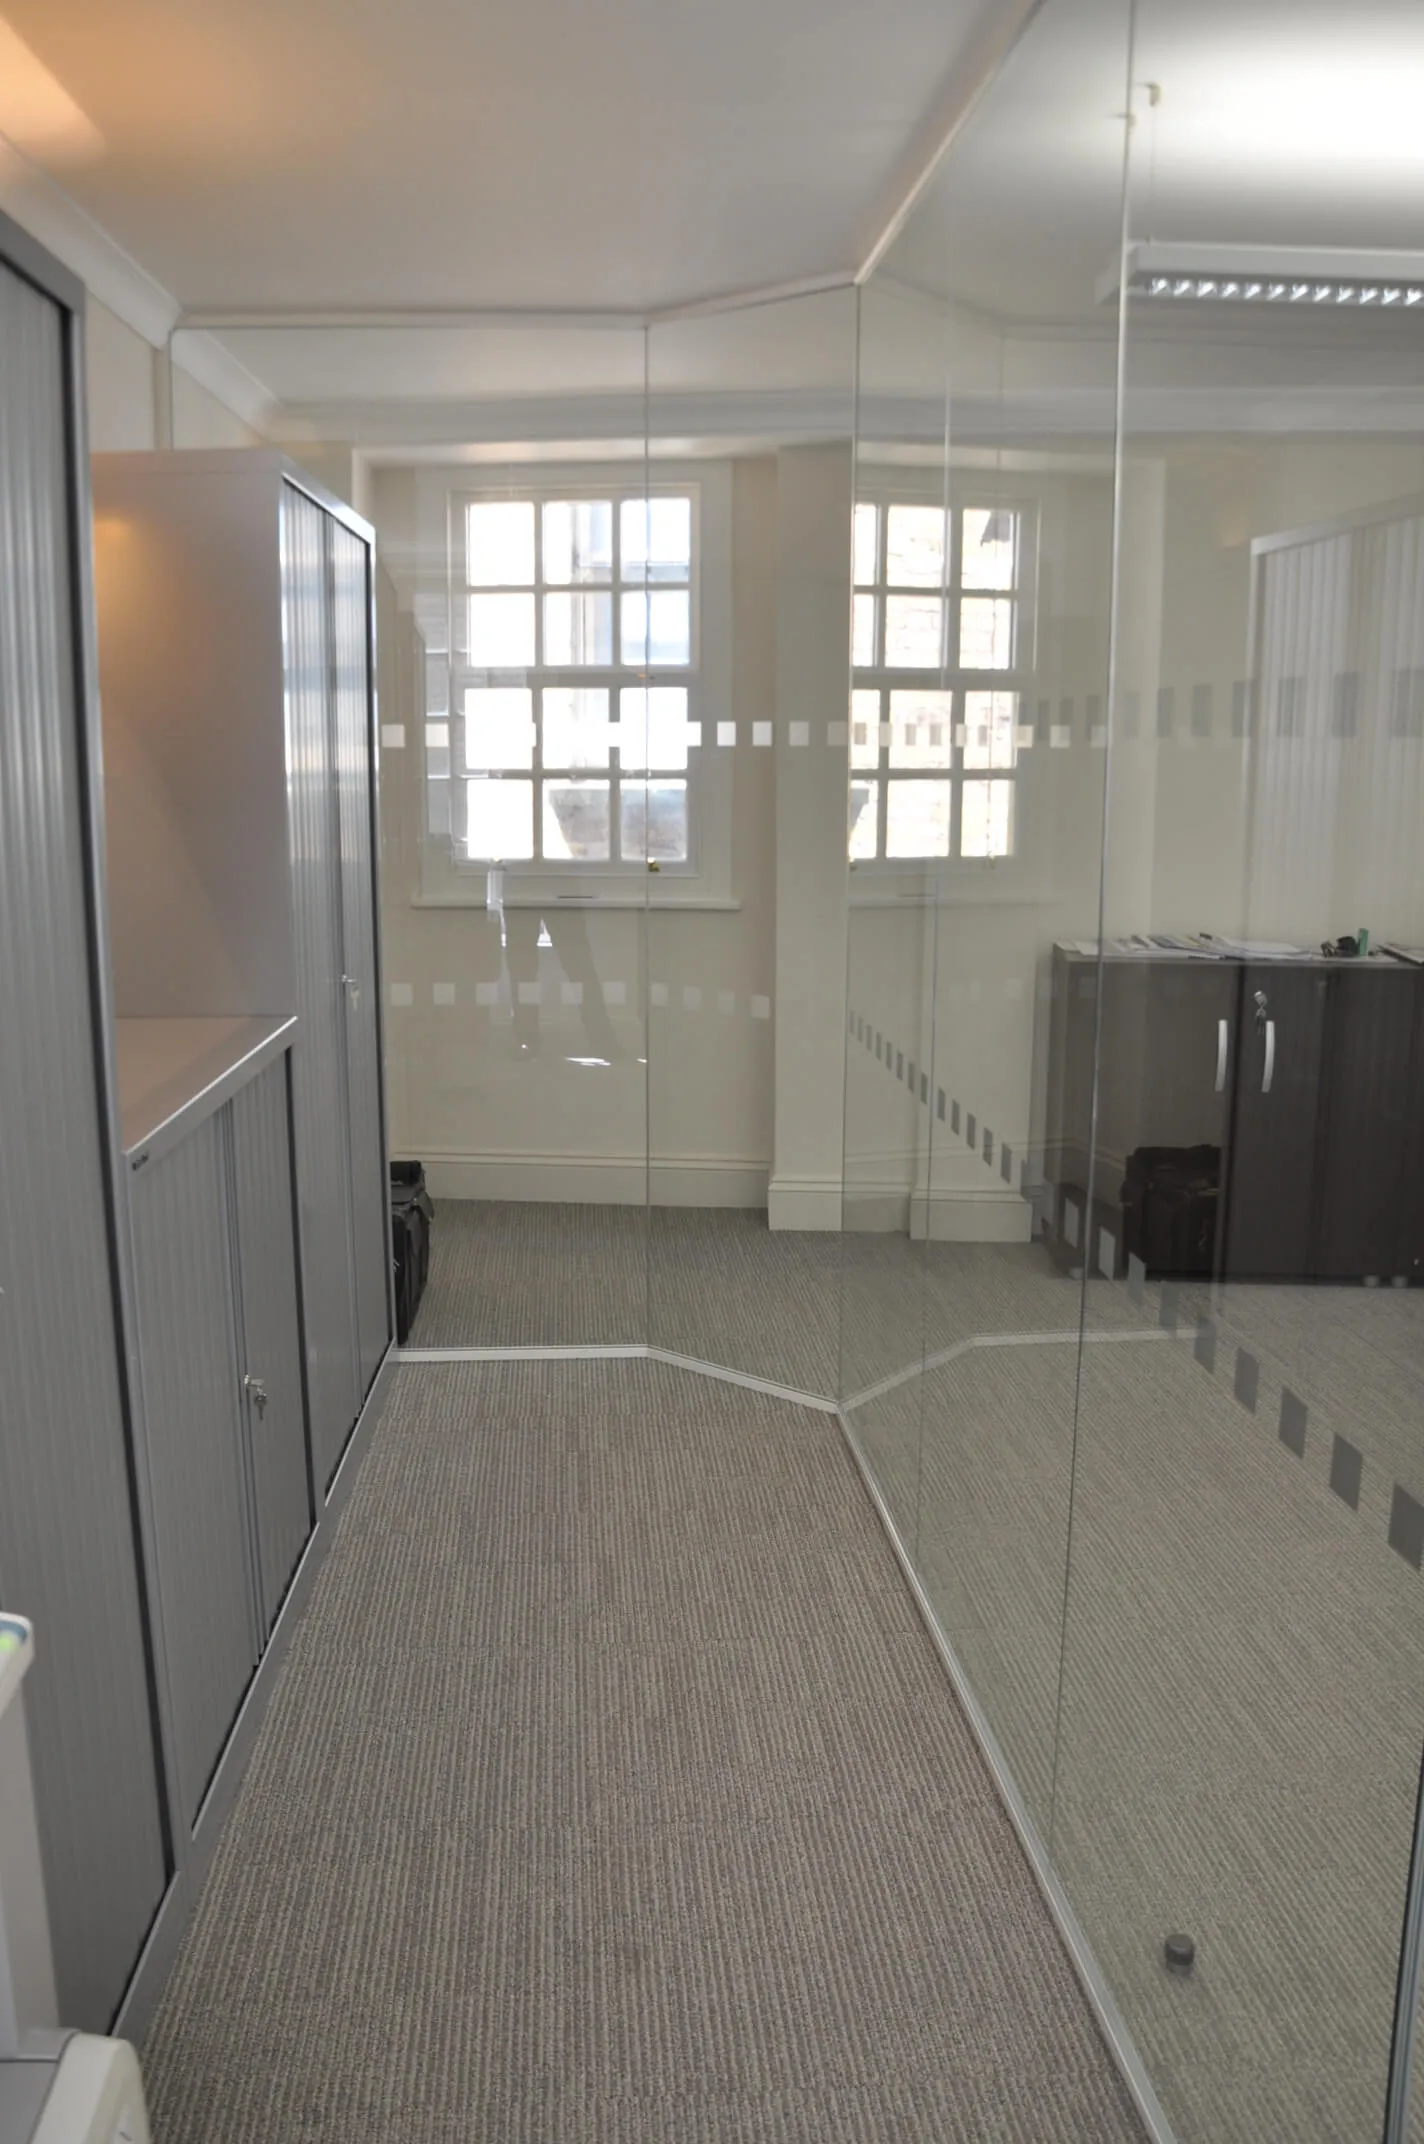 Office space with storages and glass partitions